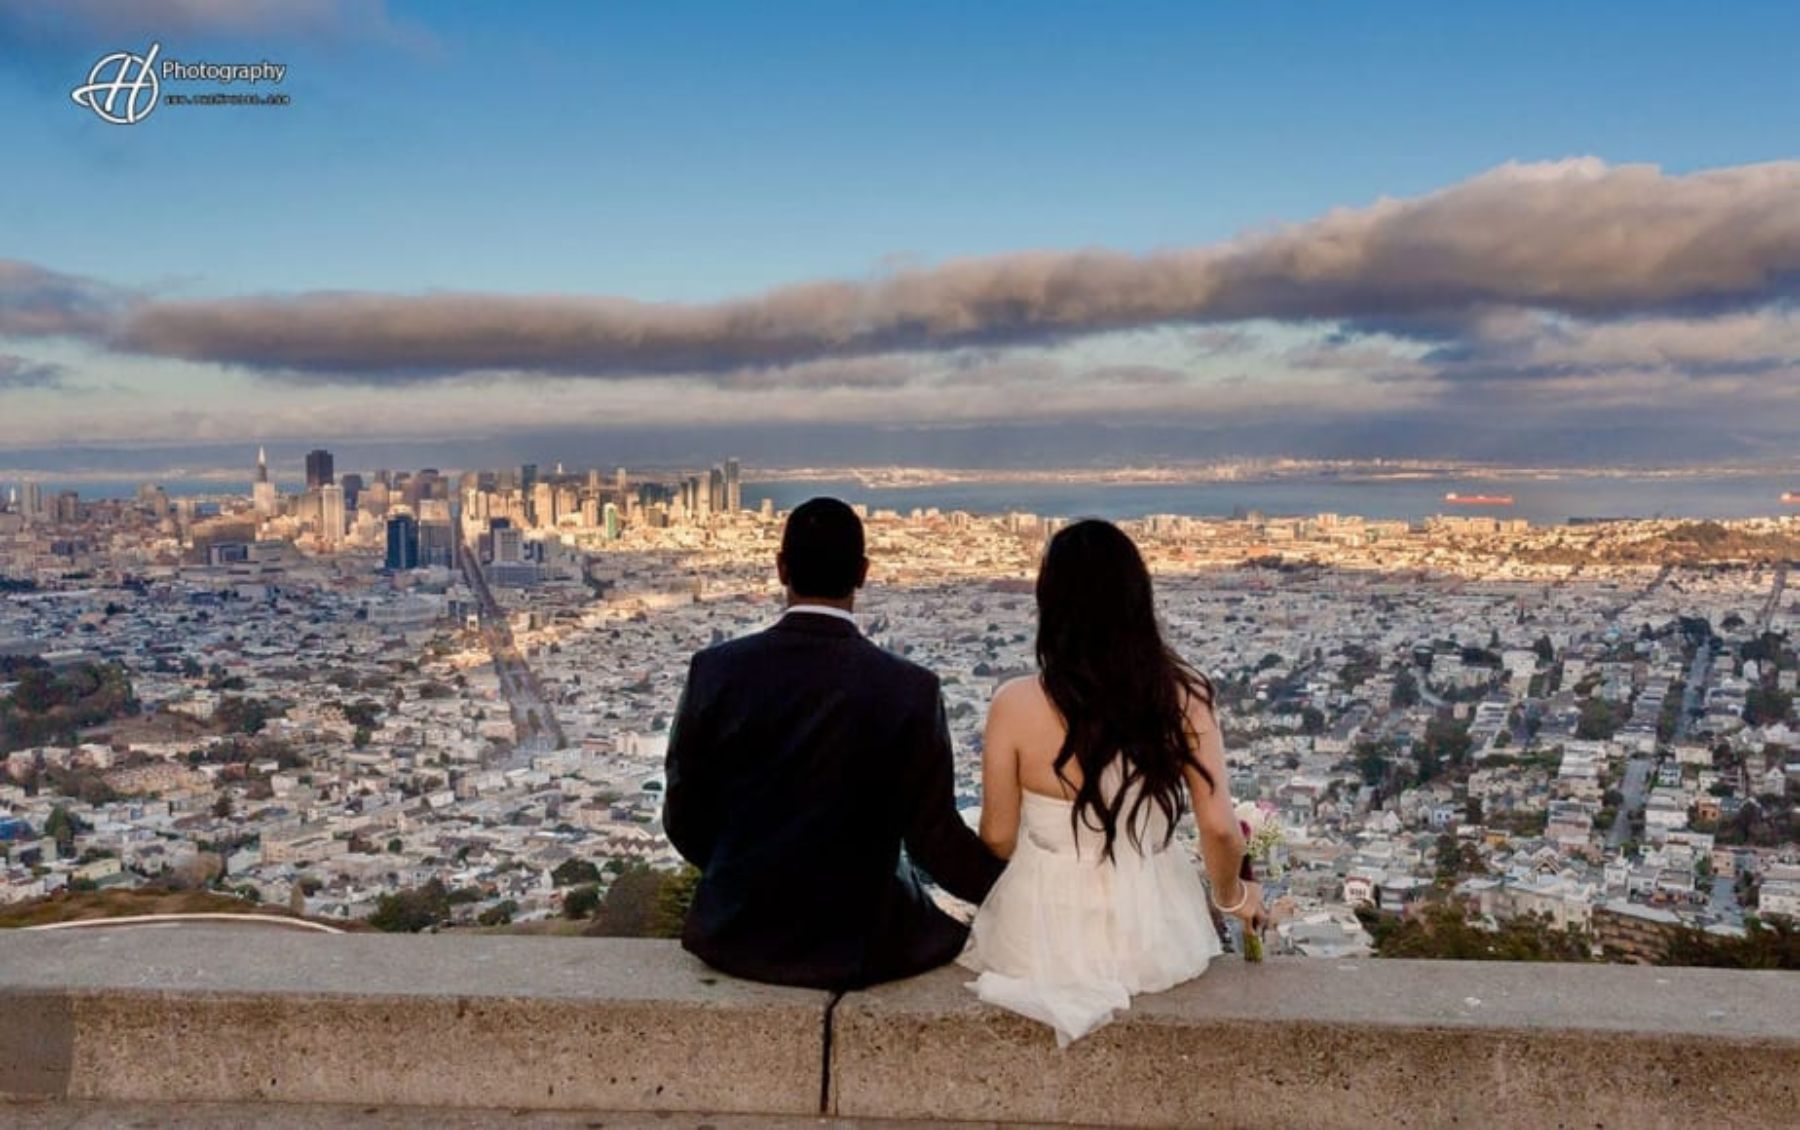 Bride and groom sitting backs to camera looking at city